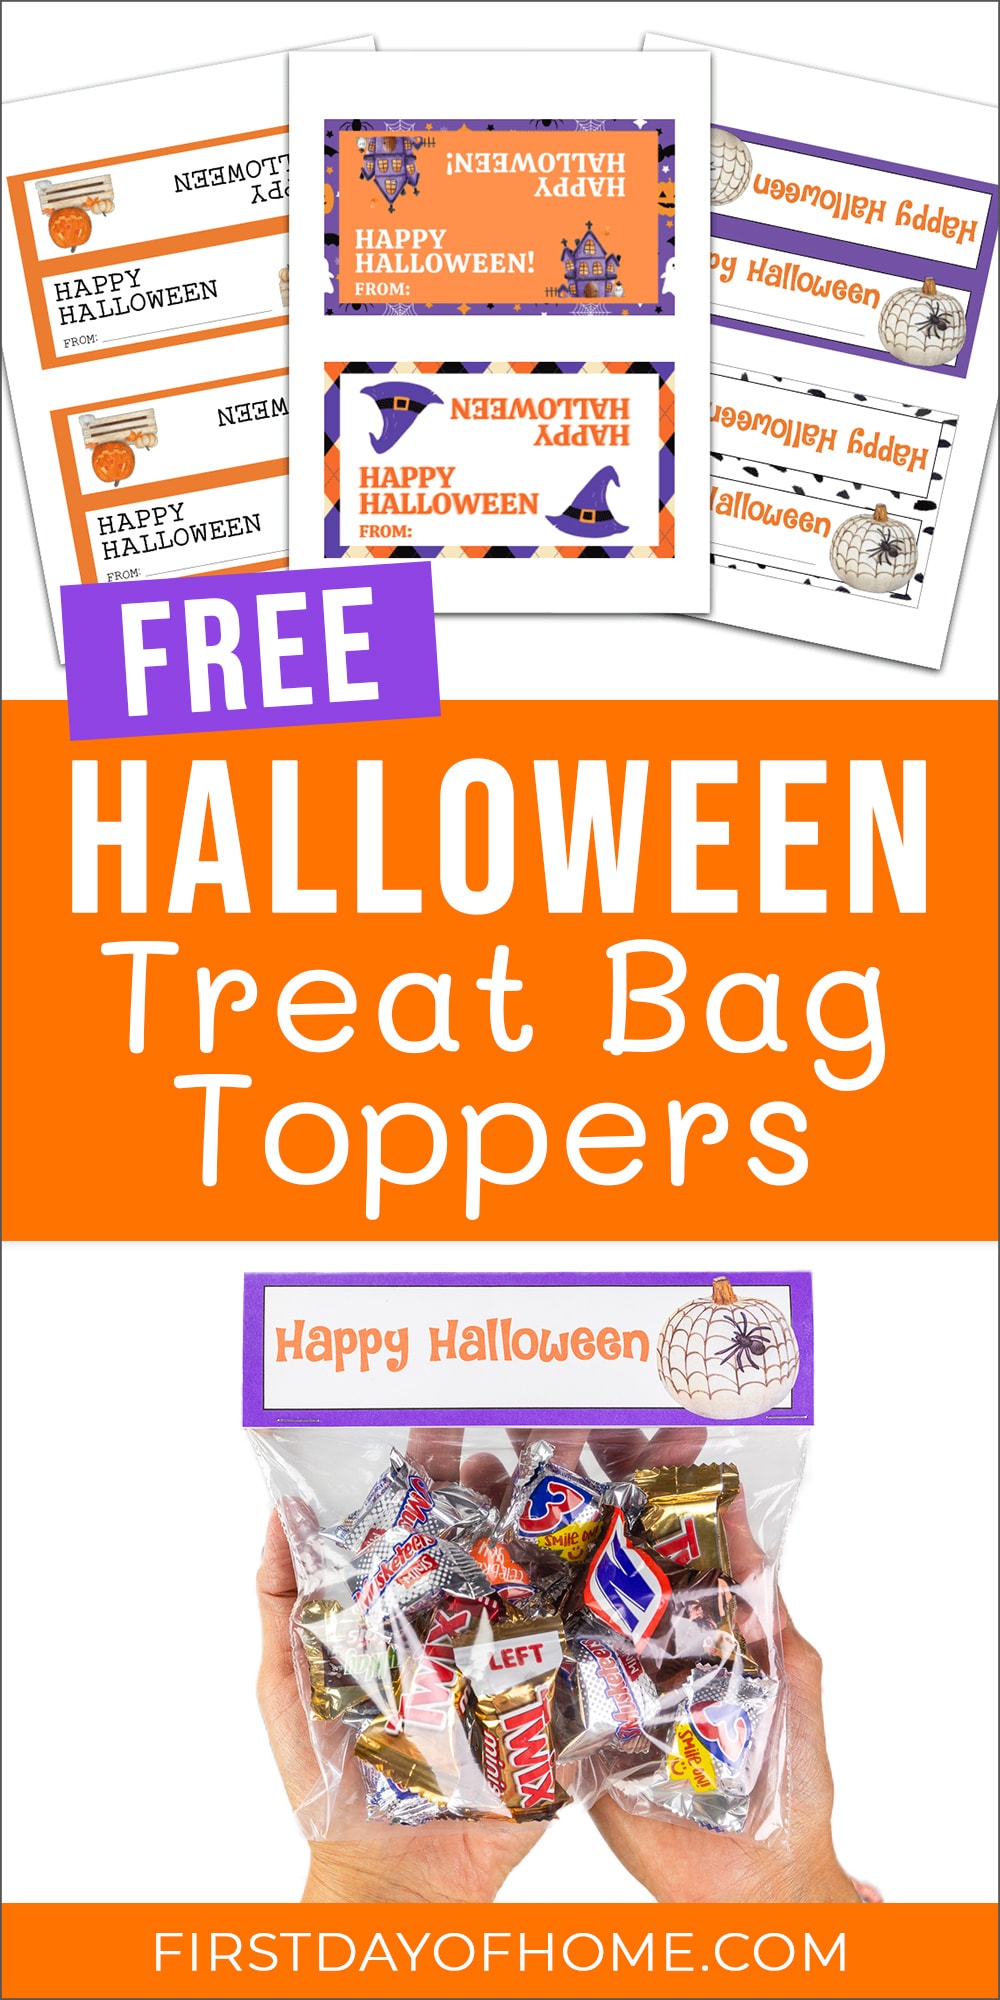 Halloween treat bag toppers that are free printables. Text overlay reads "Free Halloween Treat Bag Toppers"